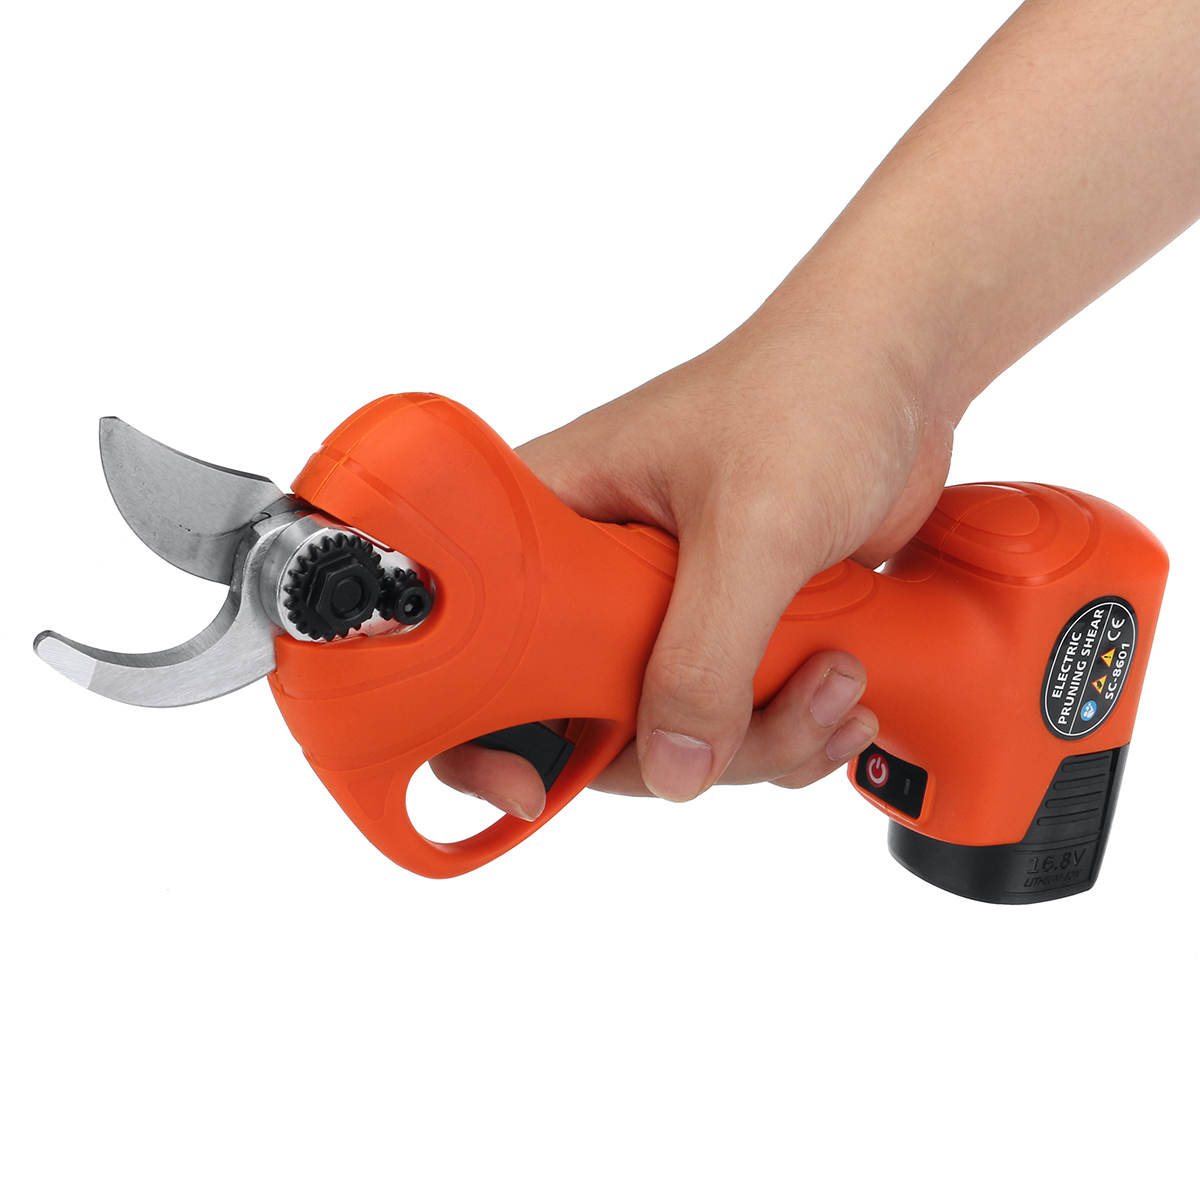 600W-168V-Cordless-Electric-Pruning-Shears-Scissors-Garden-Branch-Cutter-Trimmer-Tool-W-12-Battery-1860999-3